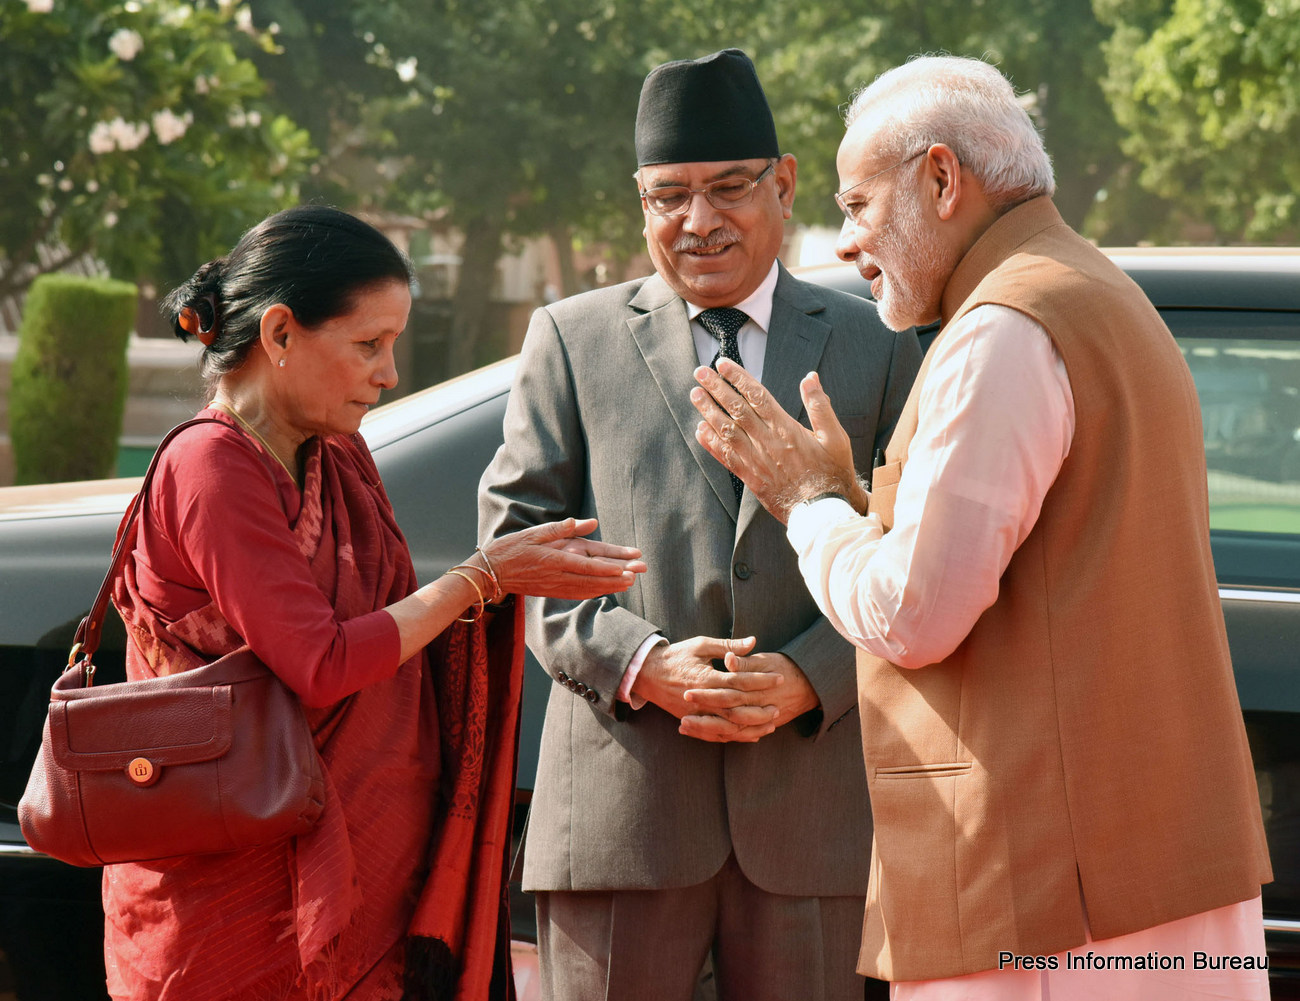 The Prime Minister of Nepal, Mr. Pushpa Kamal Dahal being received by the Prime Minister, Shri Narendra Modi, at the Ceremonial Reception, at Rashtrapati Bhavan, in New Delhi on September 16, 2016.